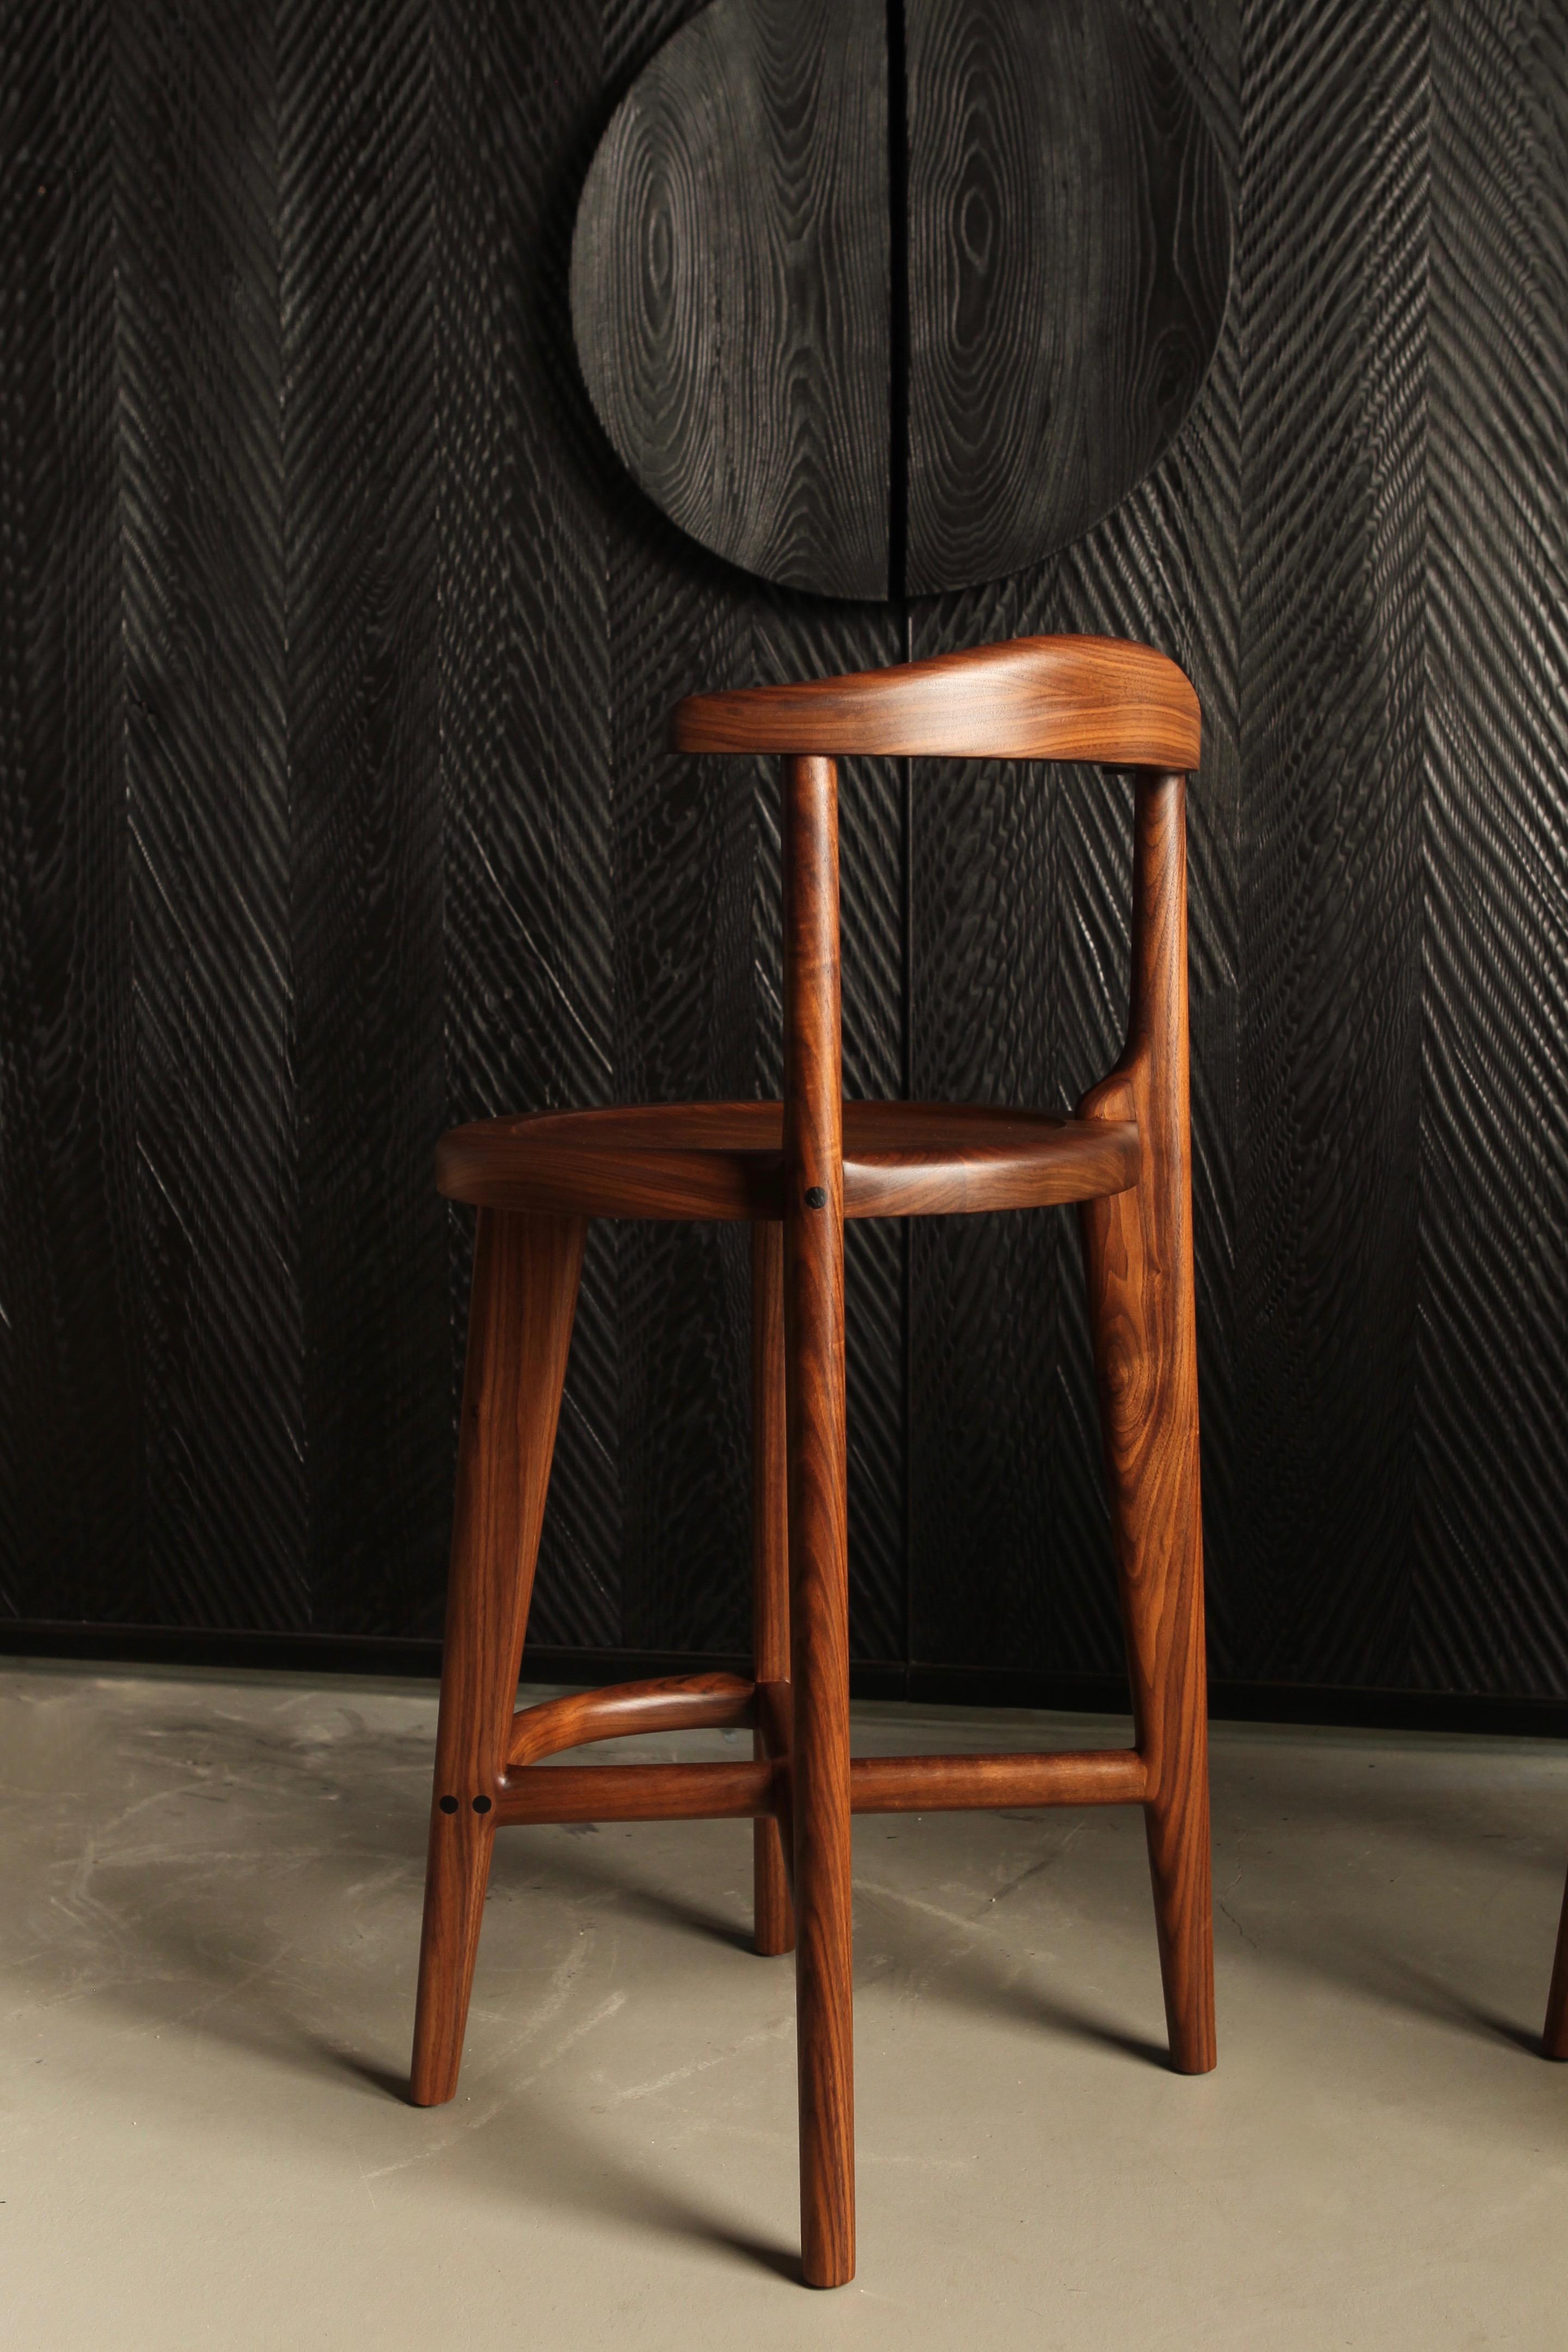 A classic design that will beautifully suit any home interior. Crafted from solid American black walnut, wood is hand-selected for color uniformity and quality. Our stools feature generously sized seats and ergonomically sculpted back / arm